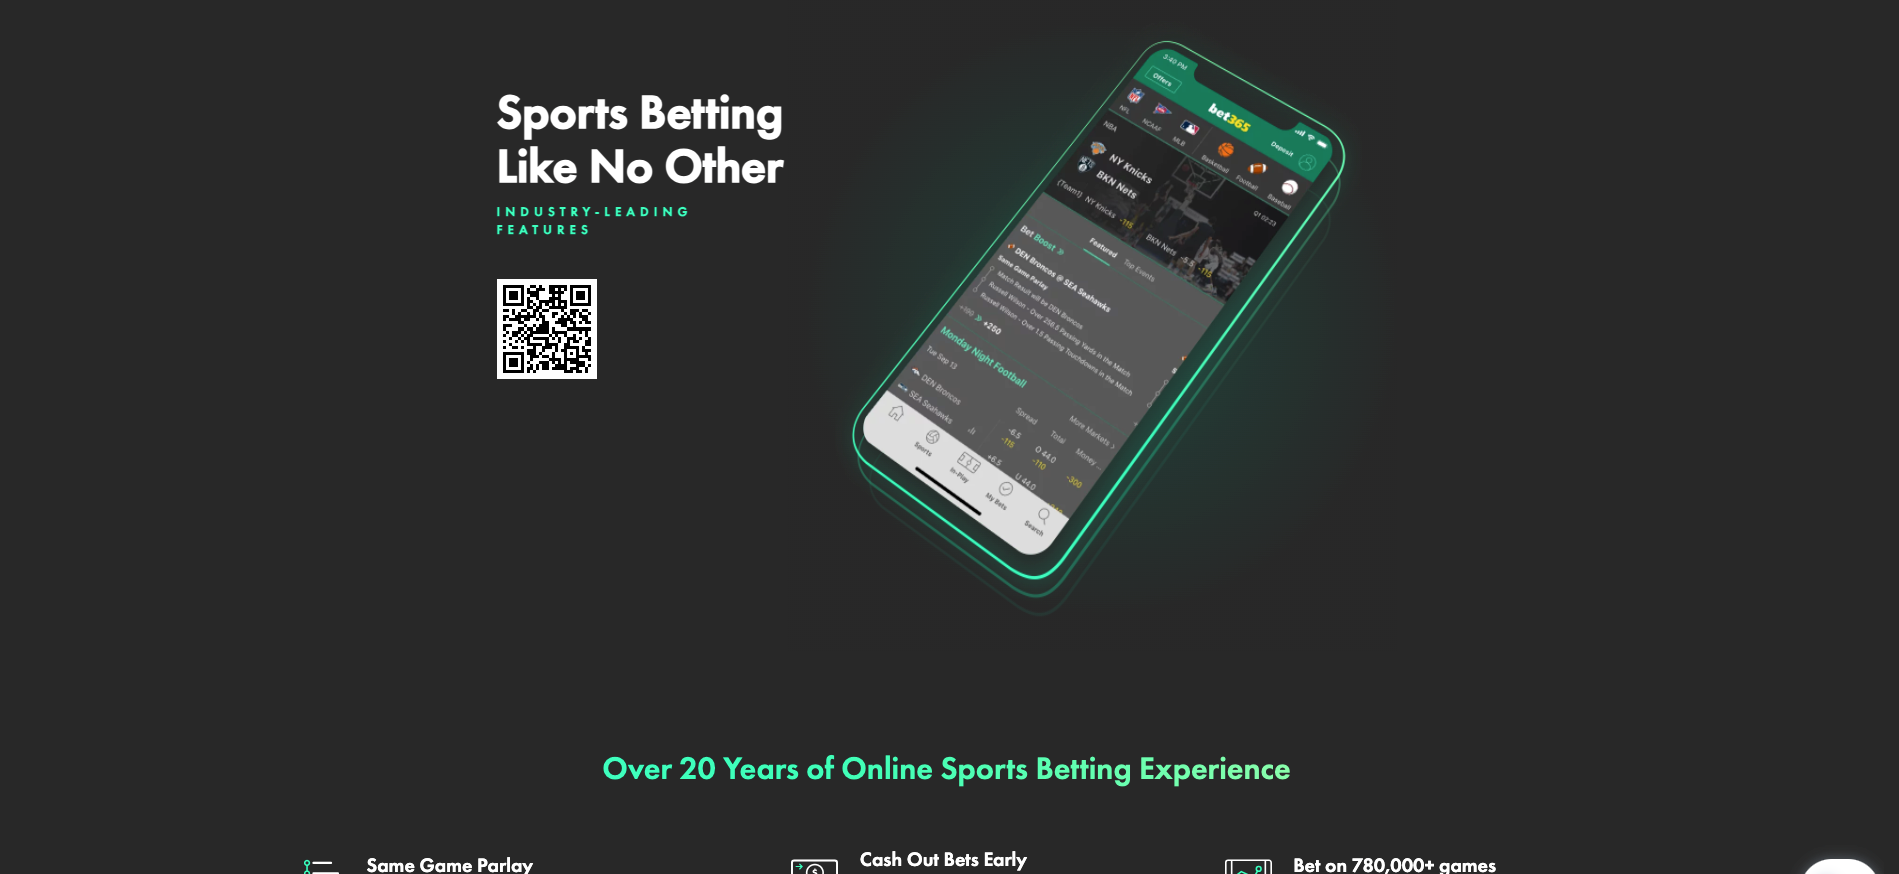 Image shows Bet365 official website